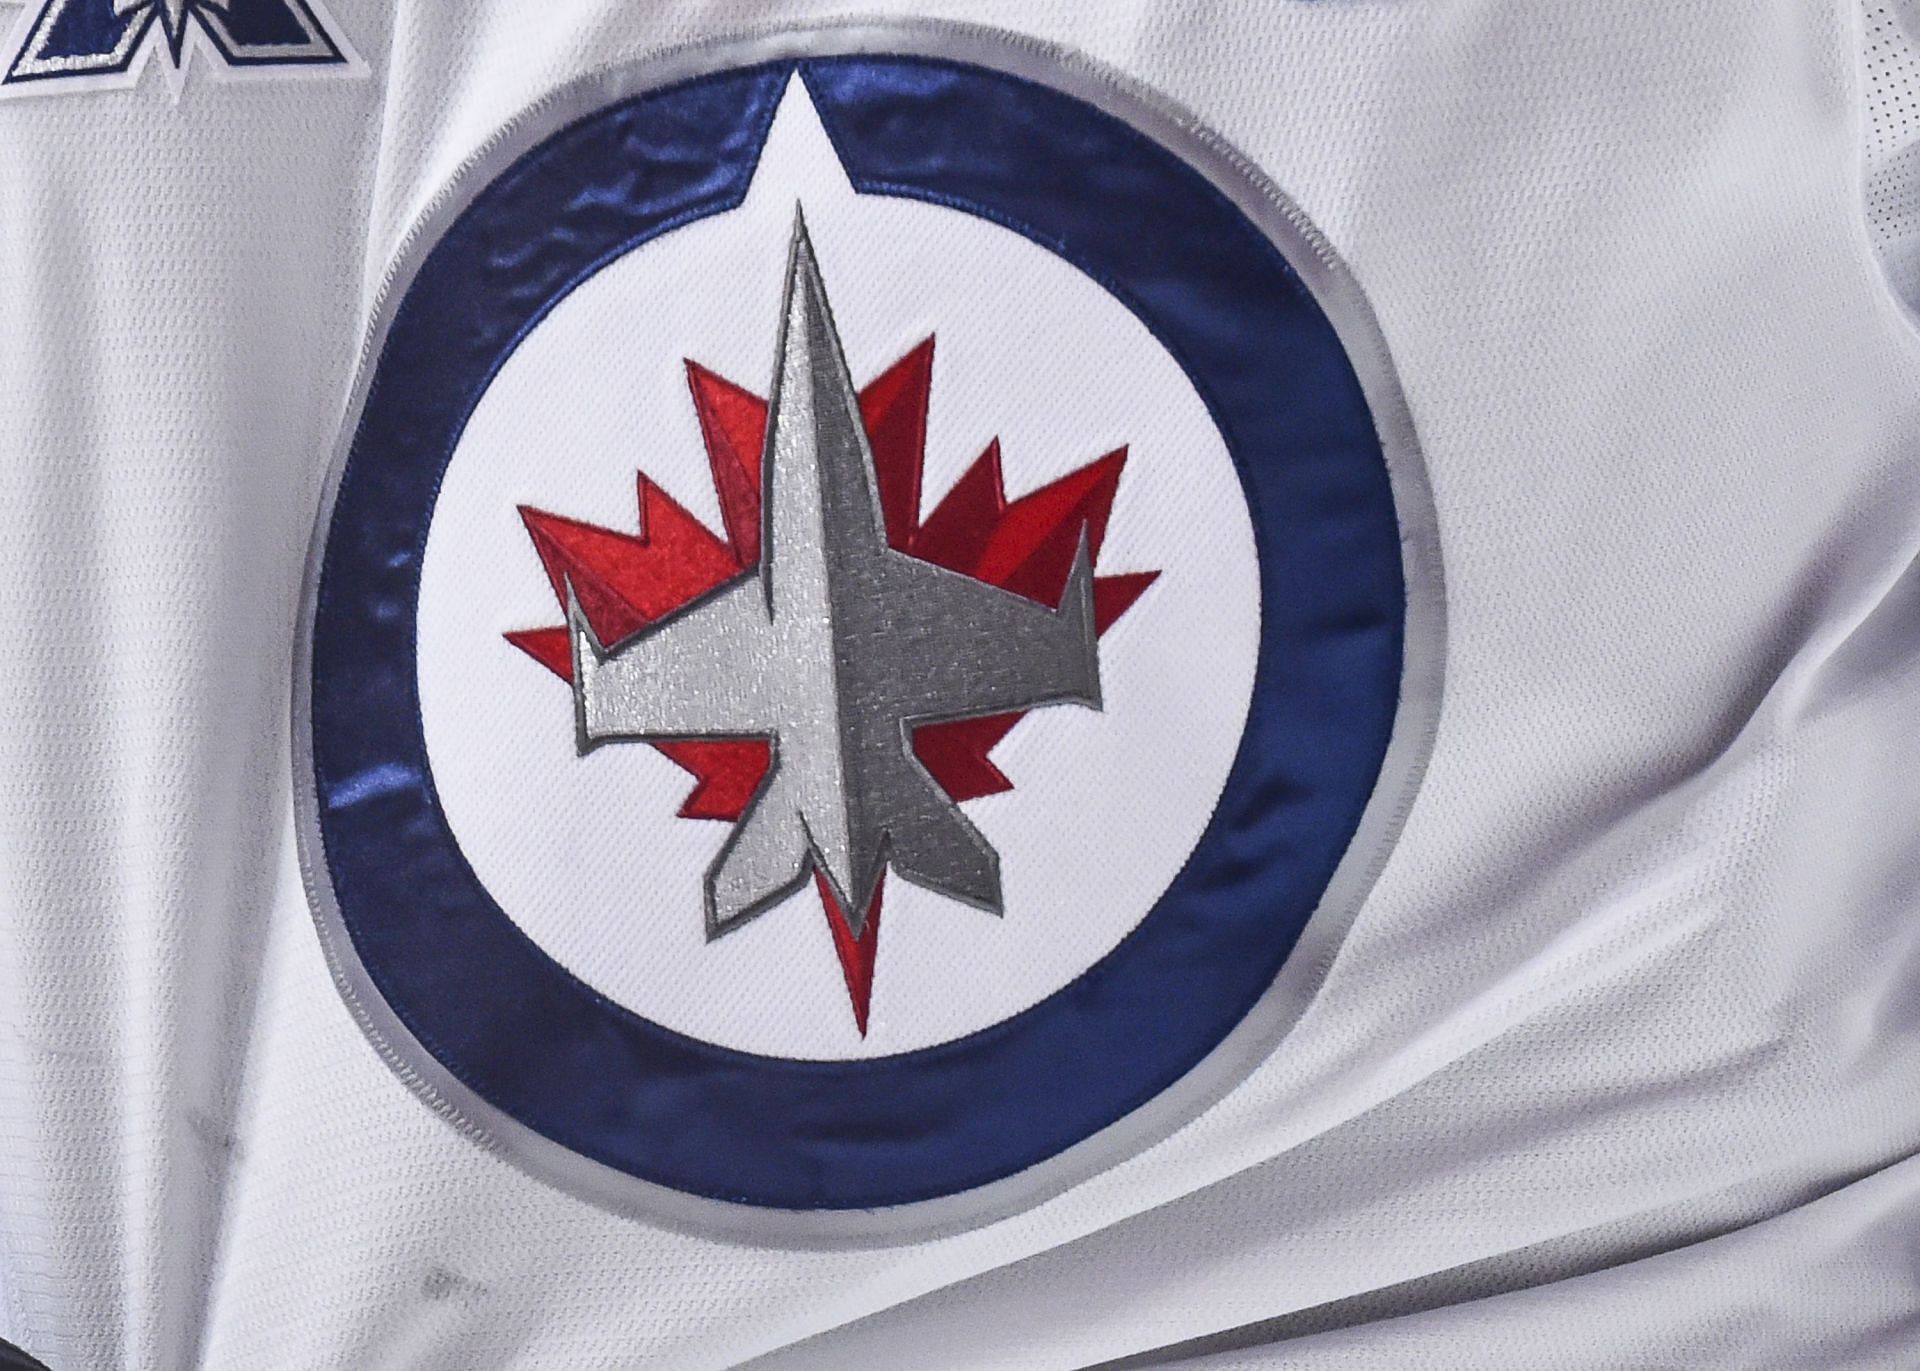 Which Winnipeg Jets players have also played for Buffalo Sabres